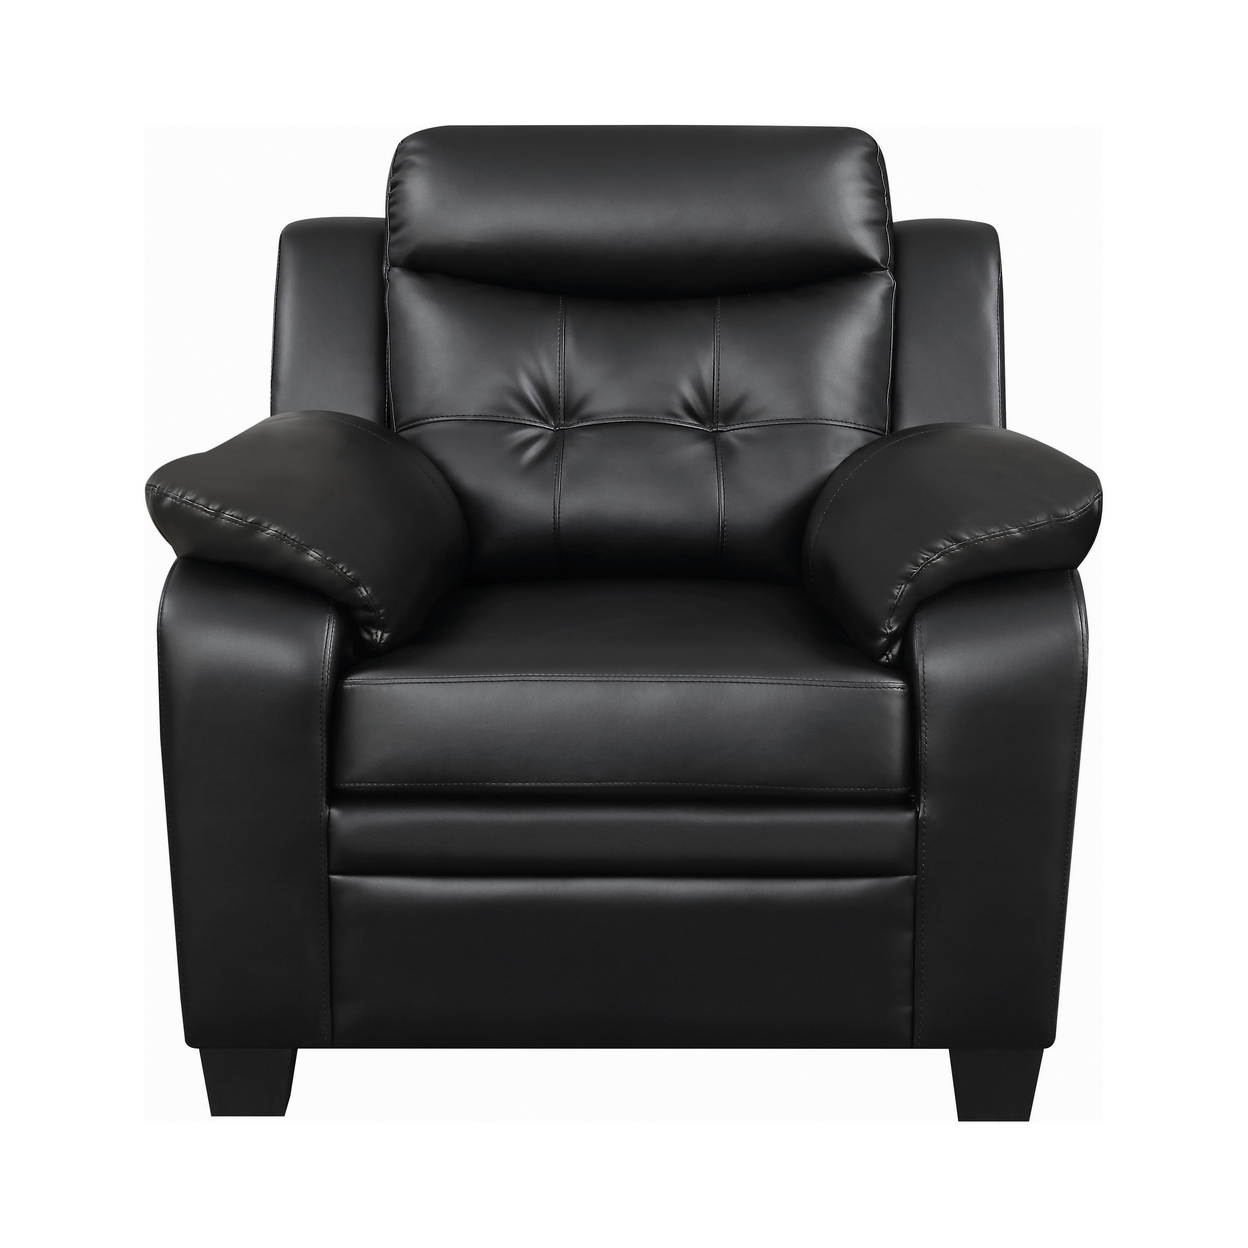 Finley Tufted Upholstered Chair Black - image 2 of 5